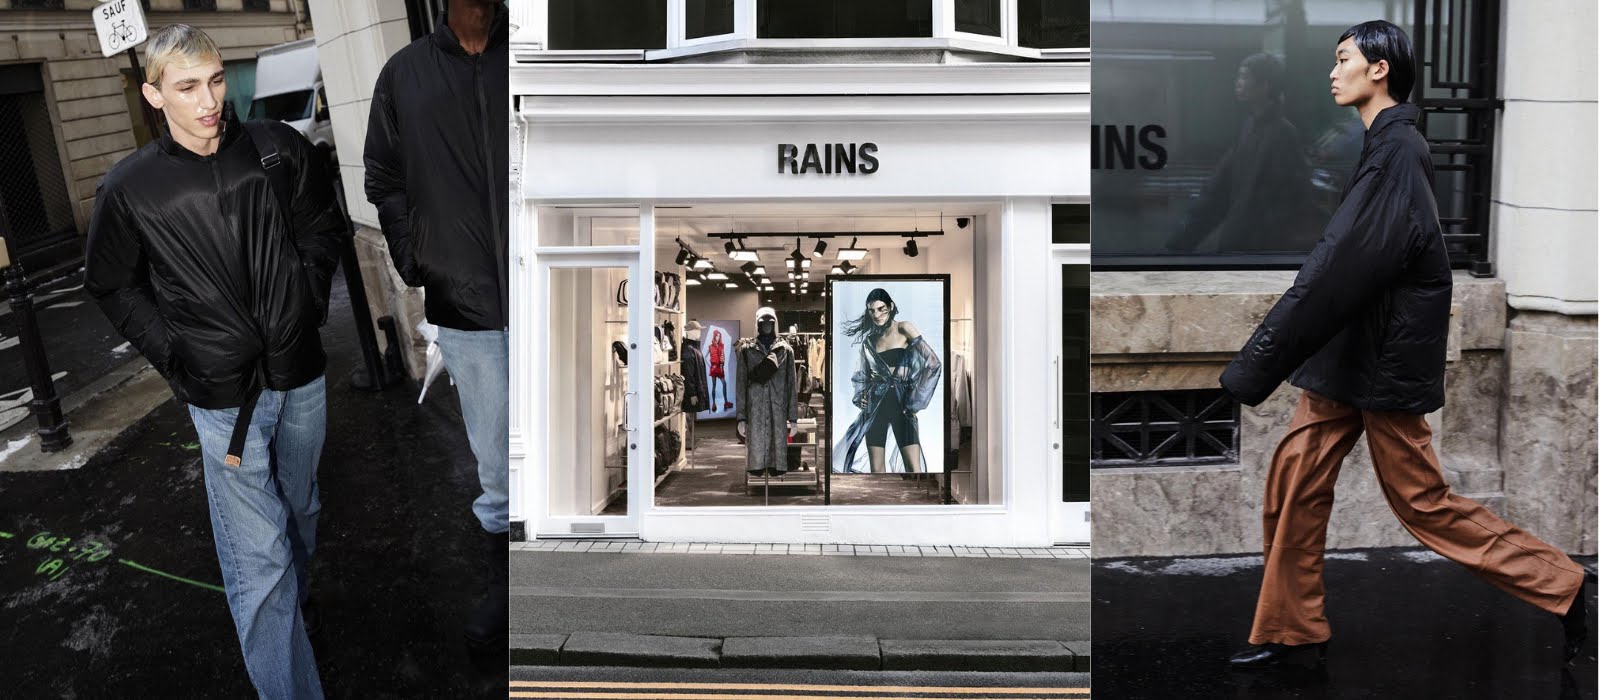 Scandi outerwear brand Rains has just opened its first Dublin store — here are the essentials